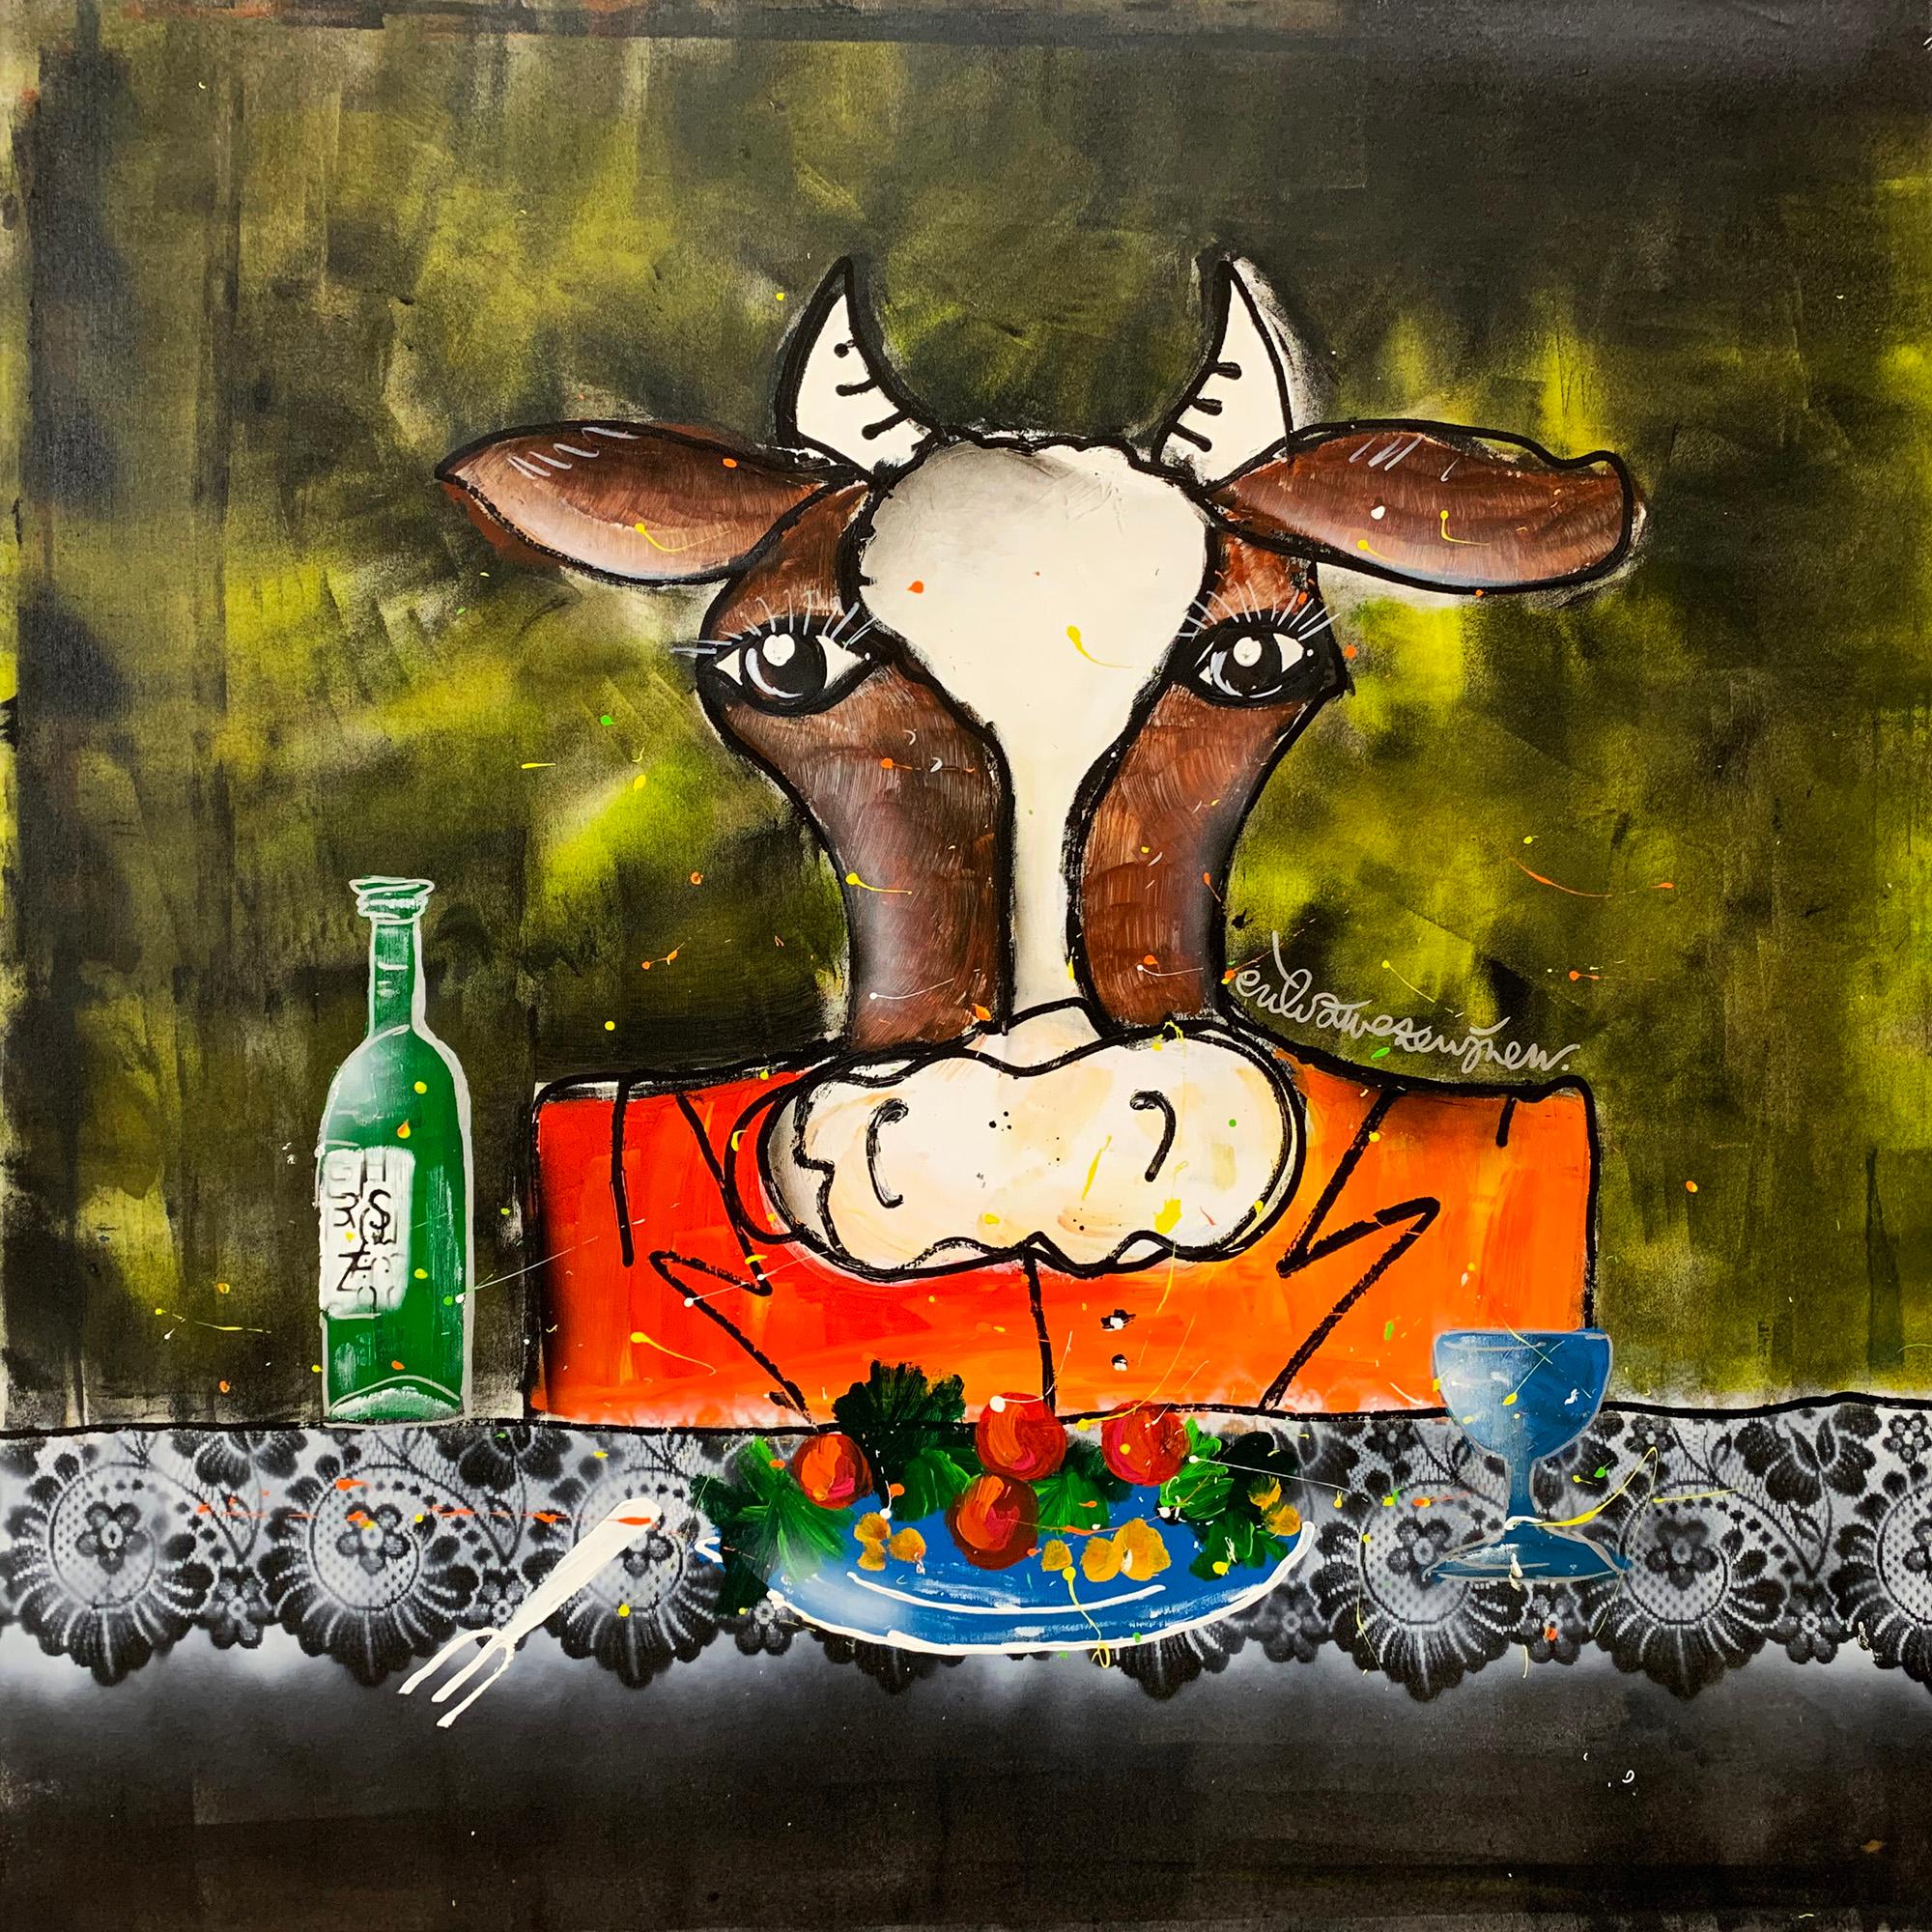 Bon appetit! - Sold as UNFRAMED - Contact us for framing possibilities

“Jaunty-Figurative” is the term that artist Erik Zwezerijnen (born Jutphaas 1958) likes to describe his paintings with. “It’s an unique combination between reality and fantasy,